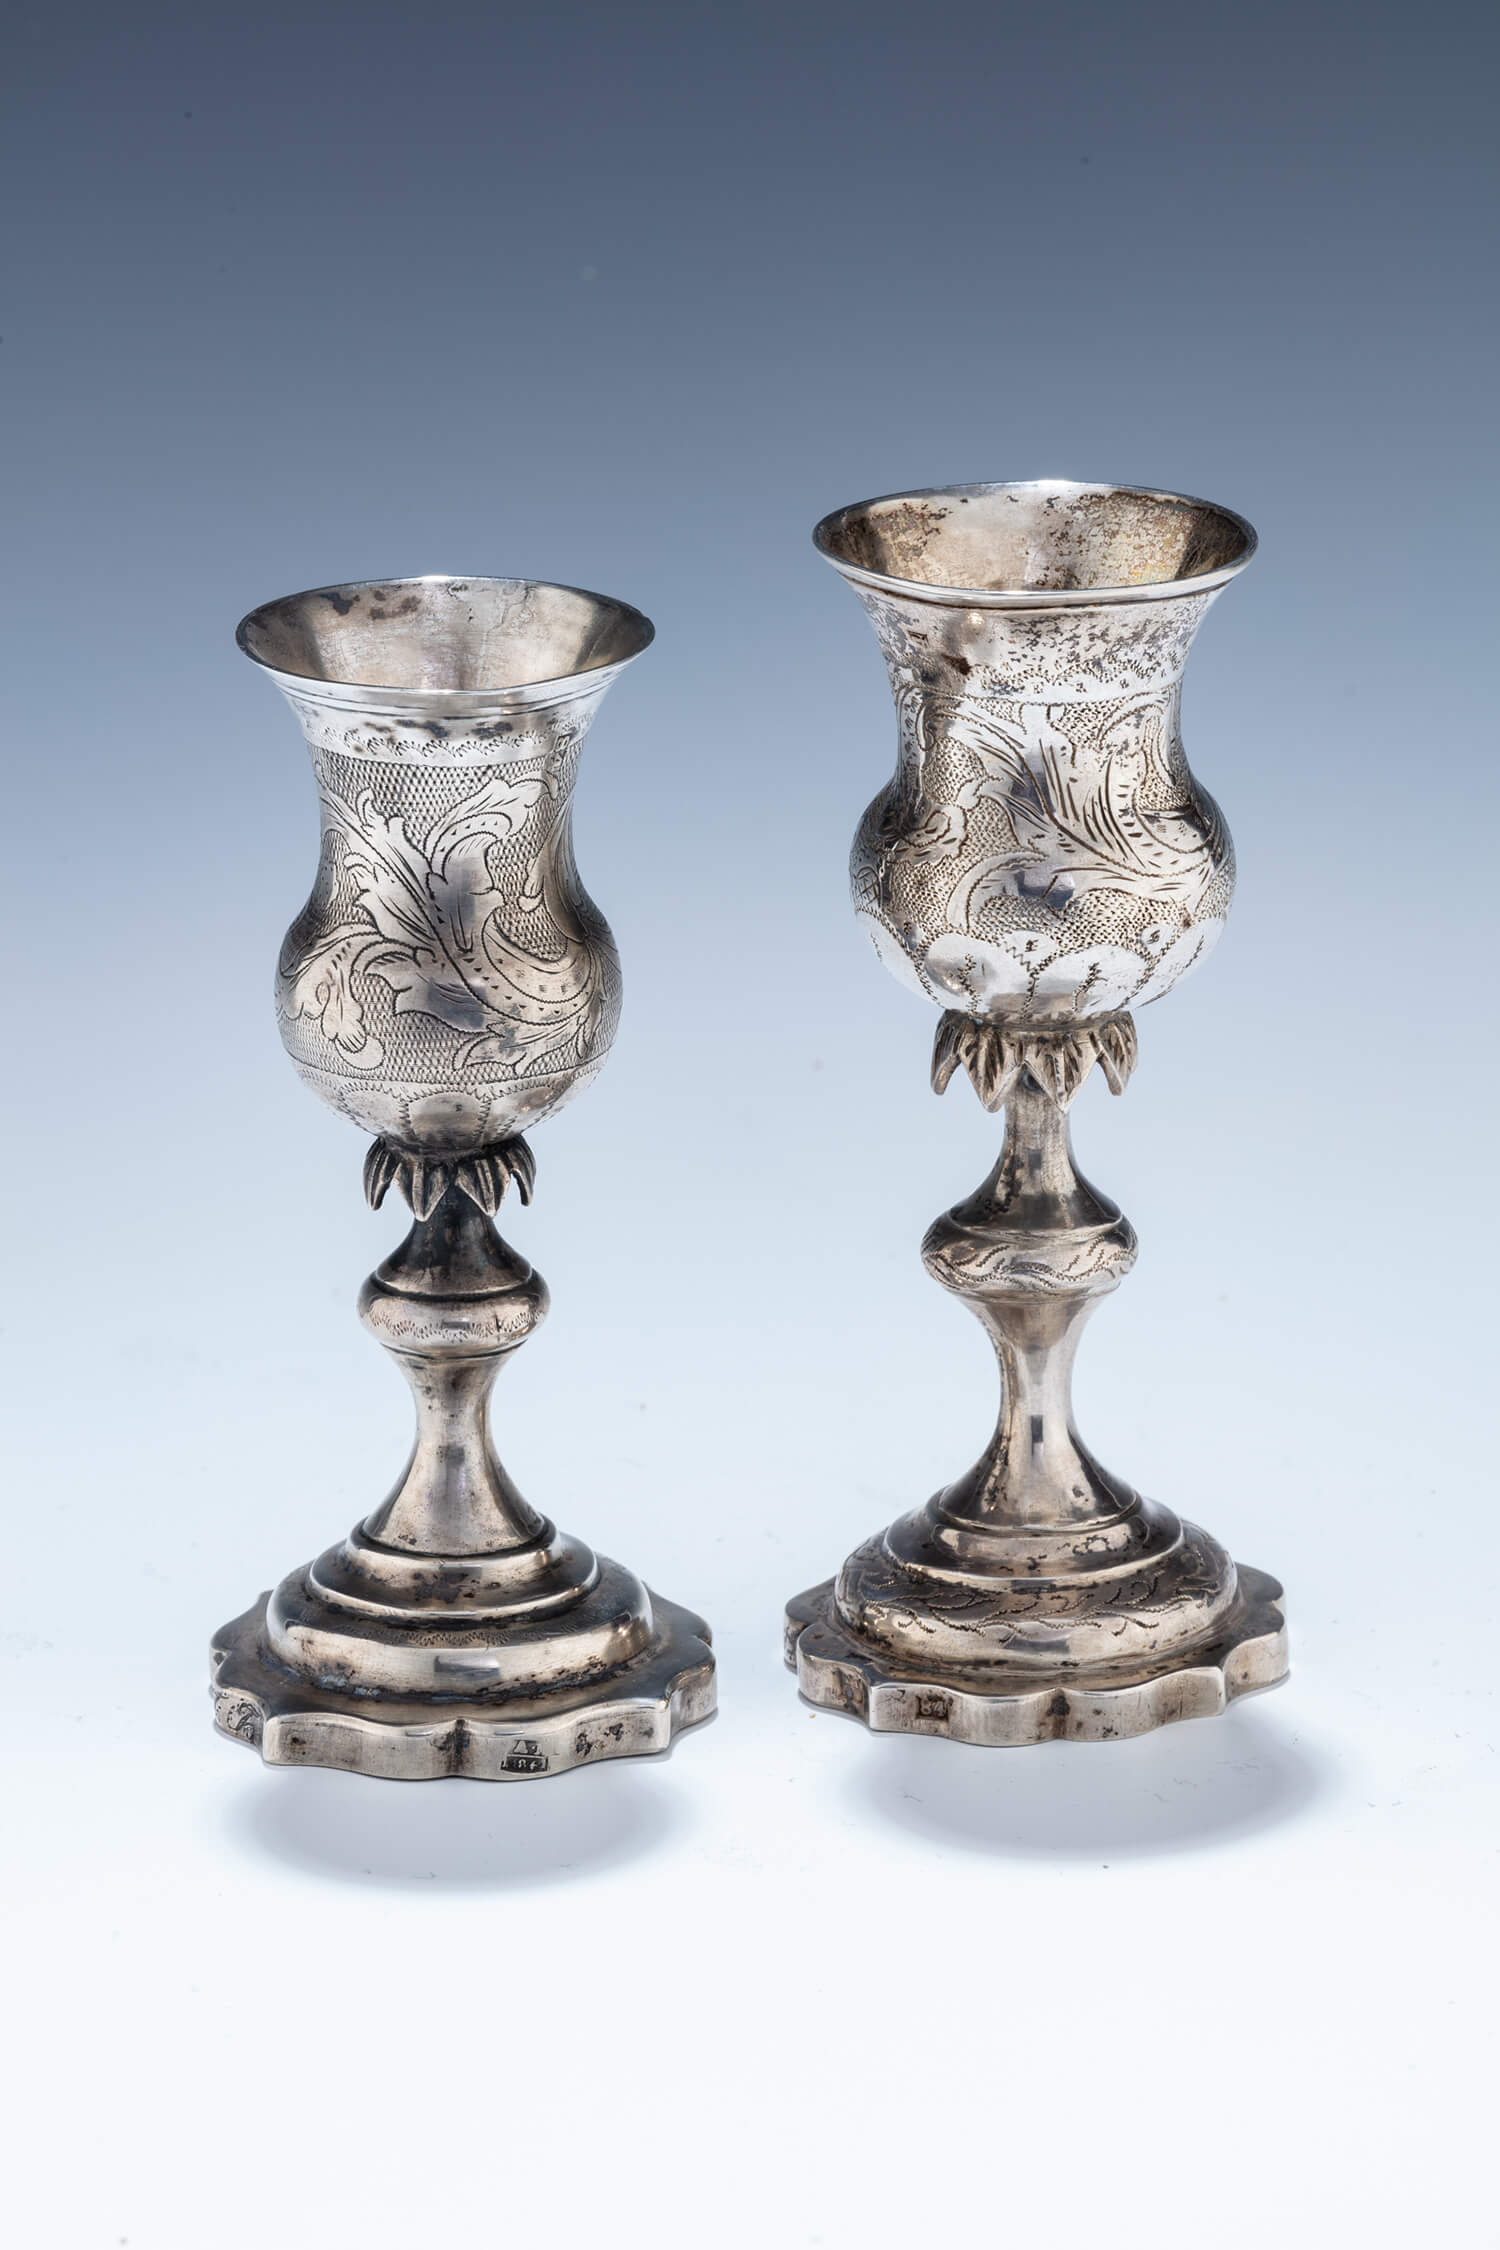 035. A PAIR OF SILVER KIDDUSH GOBLETS